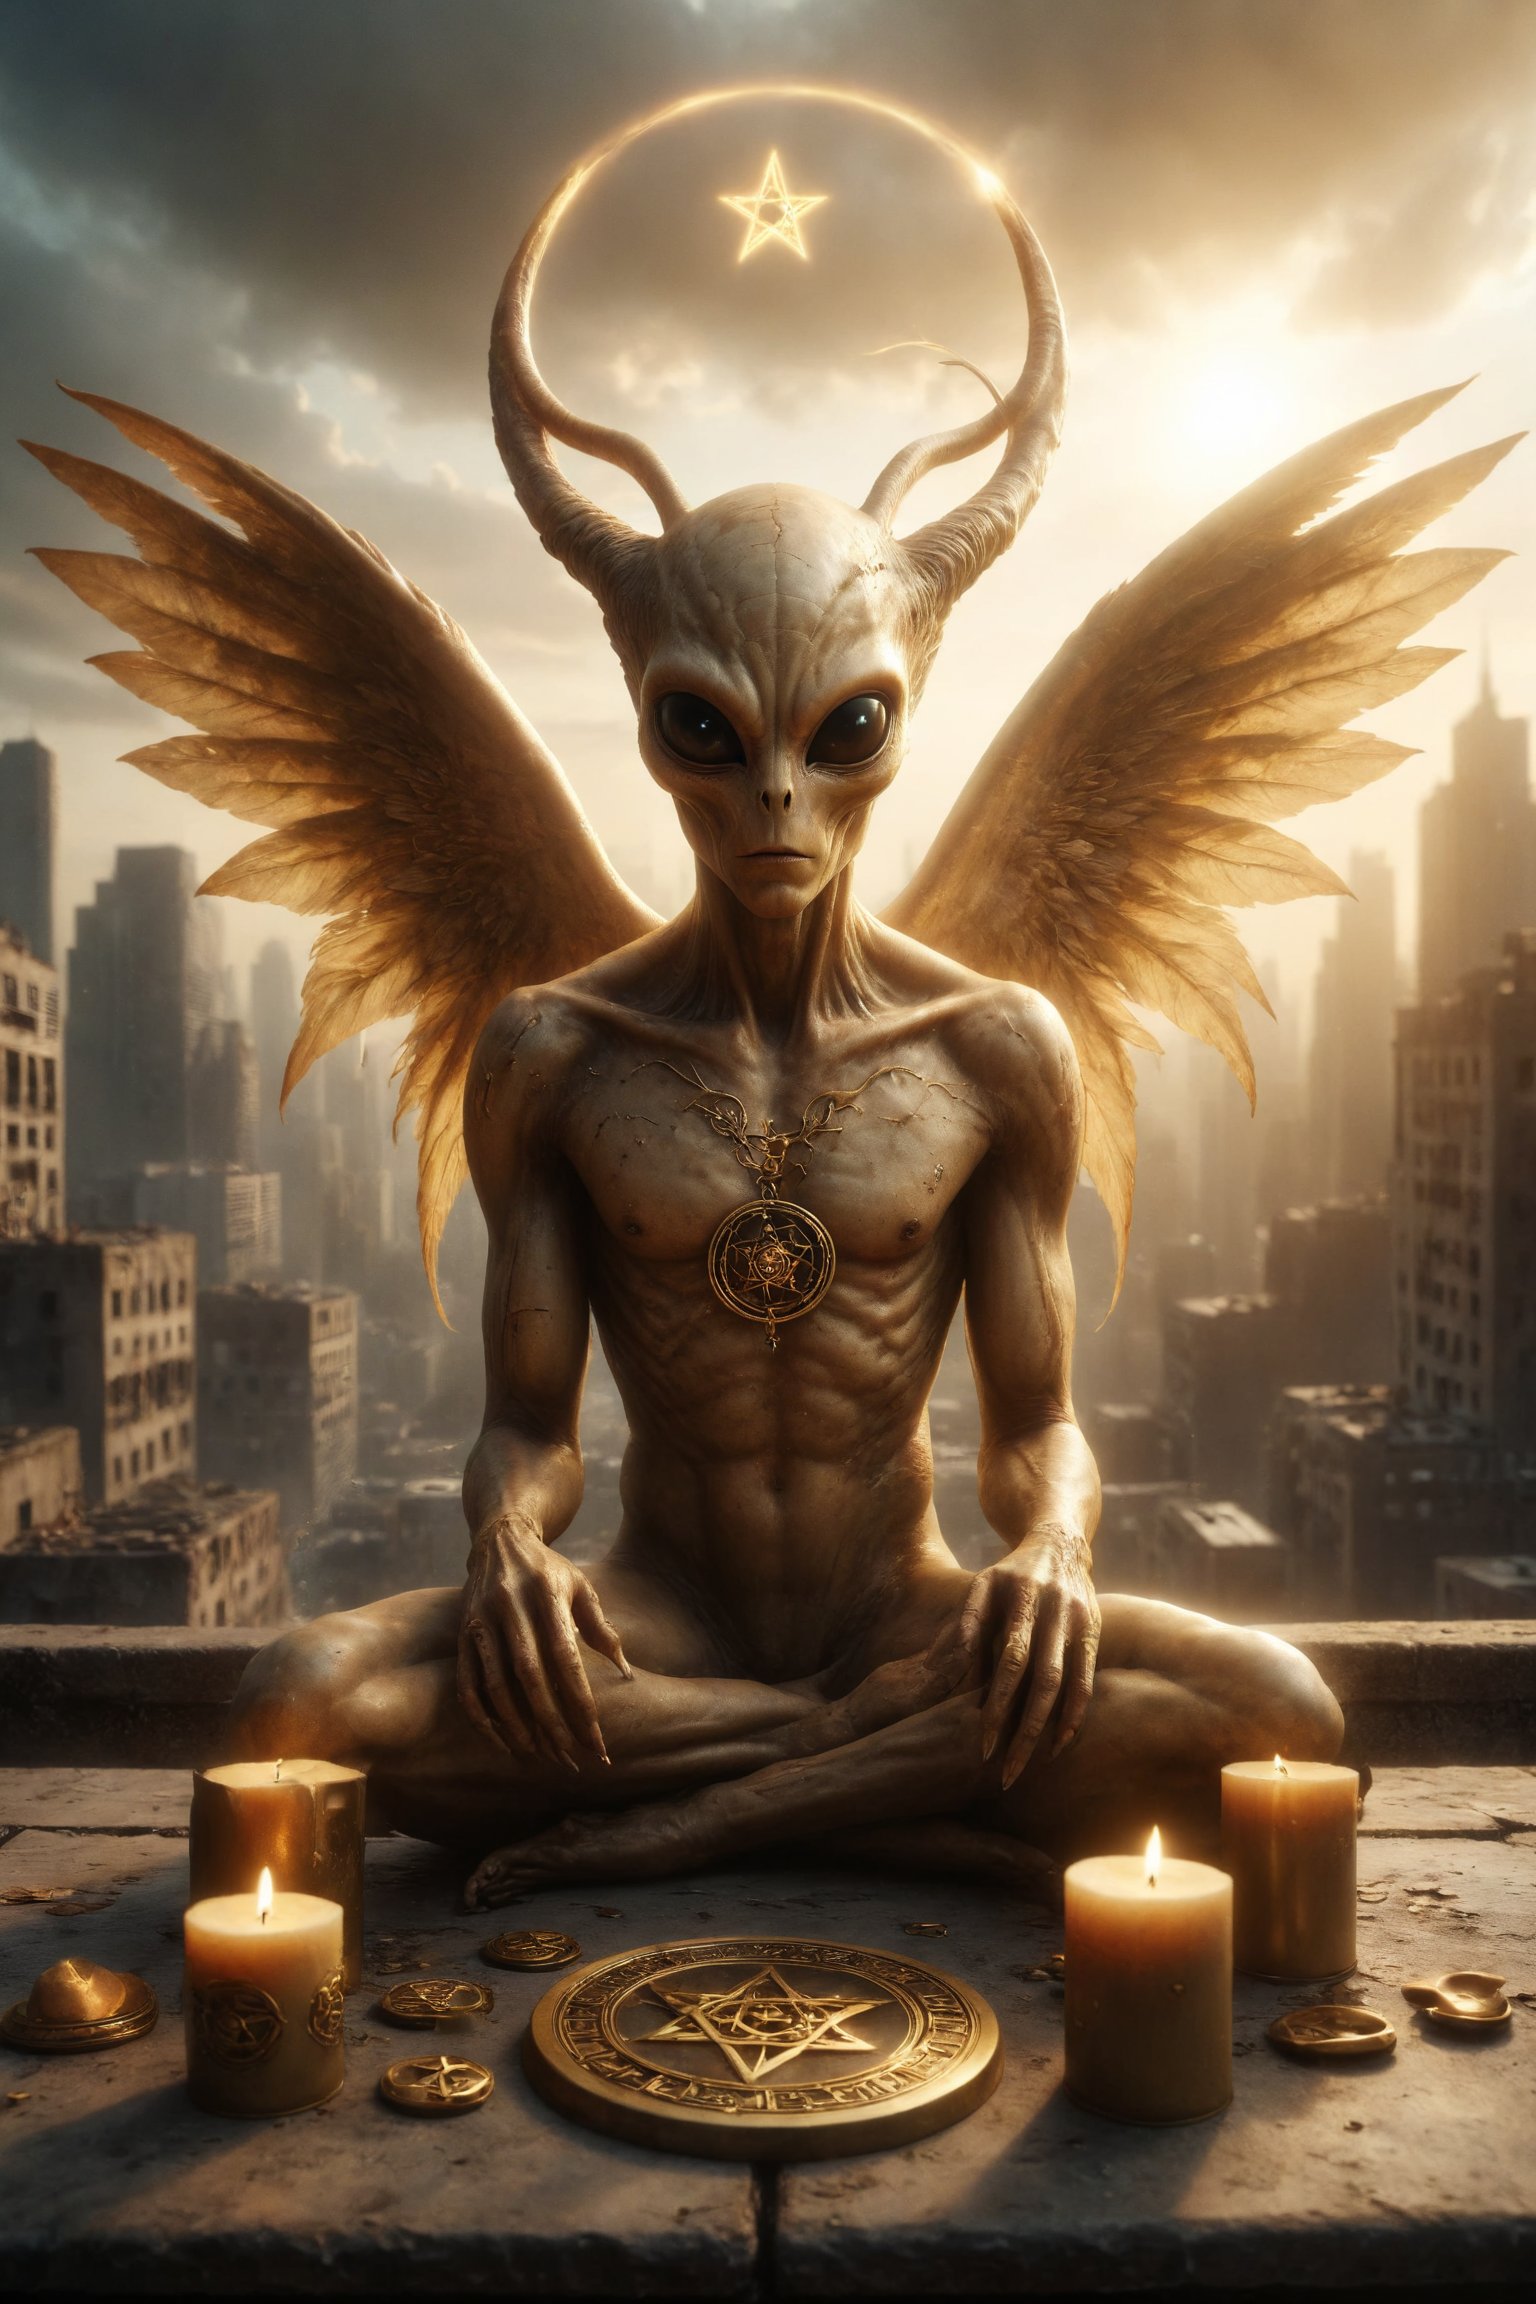 Creates a scene of a golden alien with wings and horns with 4 pentacles goldens in his possession, sitting on a terrace, with buildings in the background